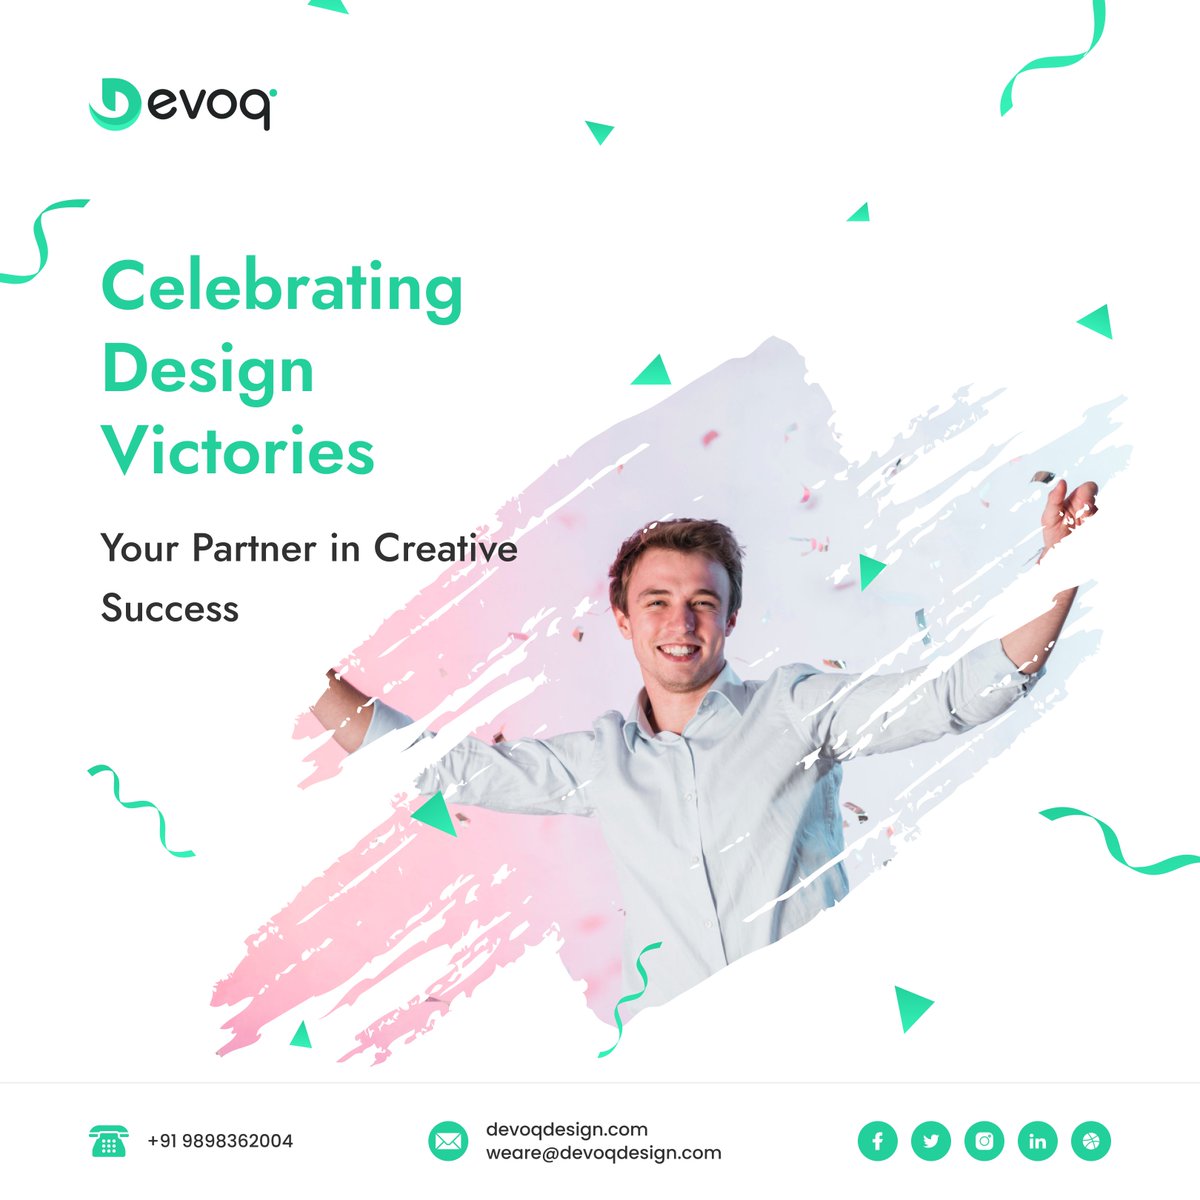 Design is where art and functionality dance in harmony. Here's to celebrating the victories of creativity and innovation.

#UXDesign #UIDesign #UserExperience #UserInterface #UIUX #DesignThinking #UXResearch #DigitalDesign #WebDesign #MobileUX #Devoq #DevoqDesign